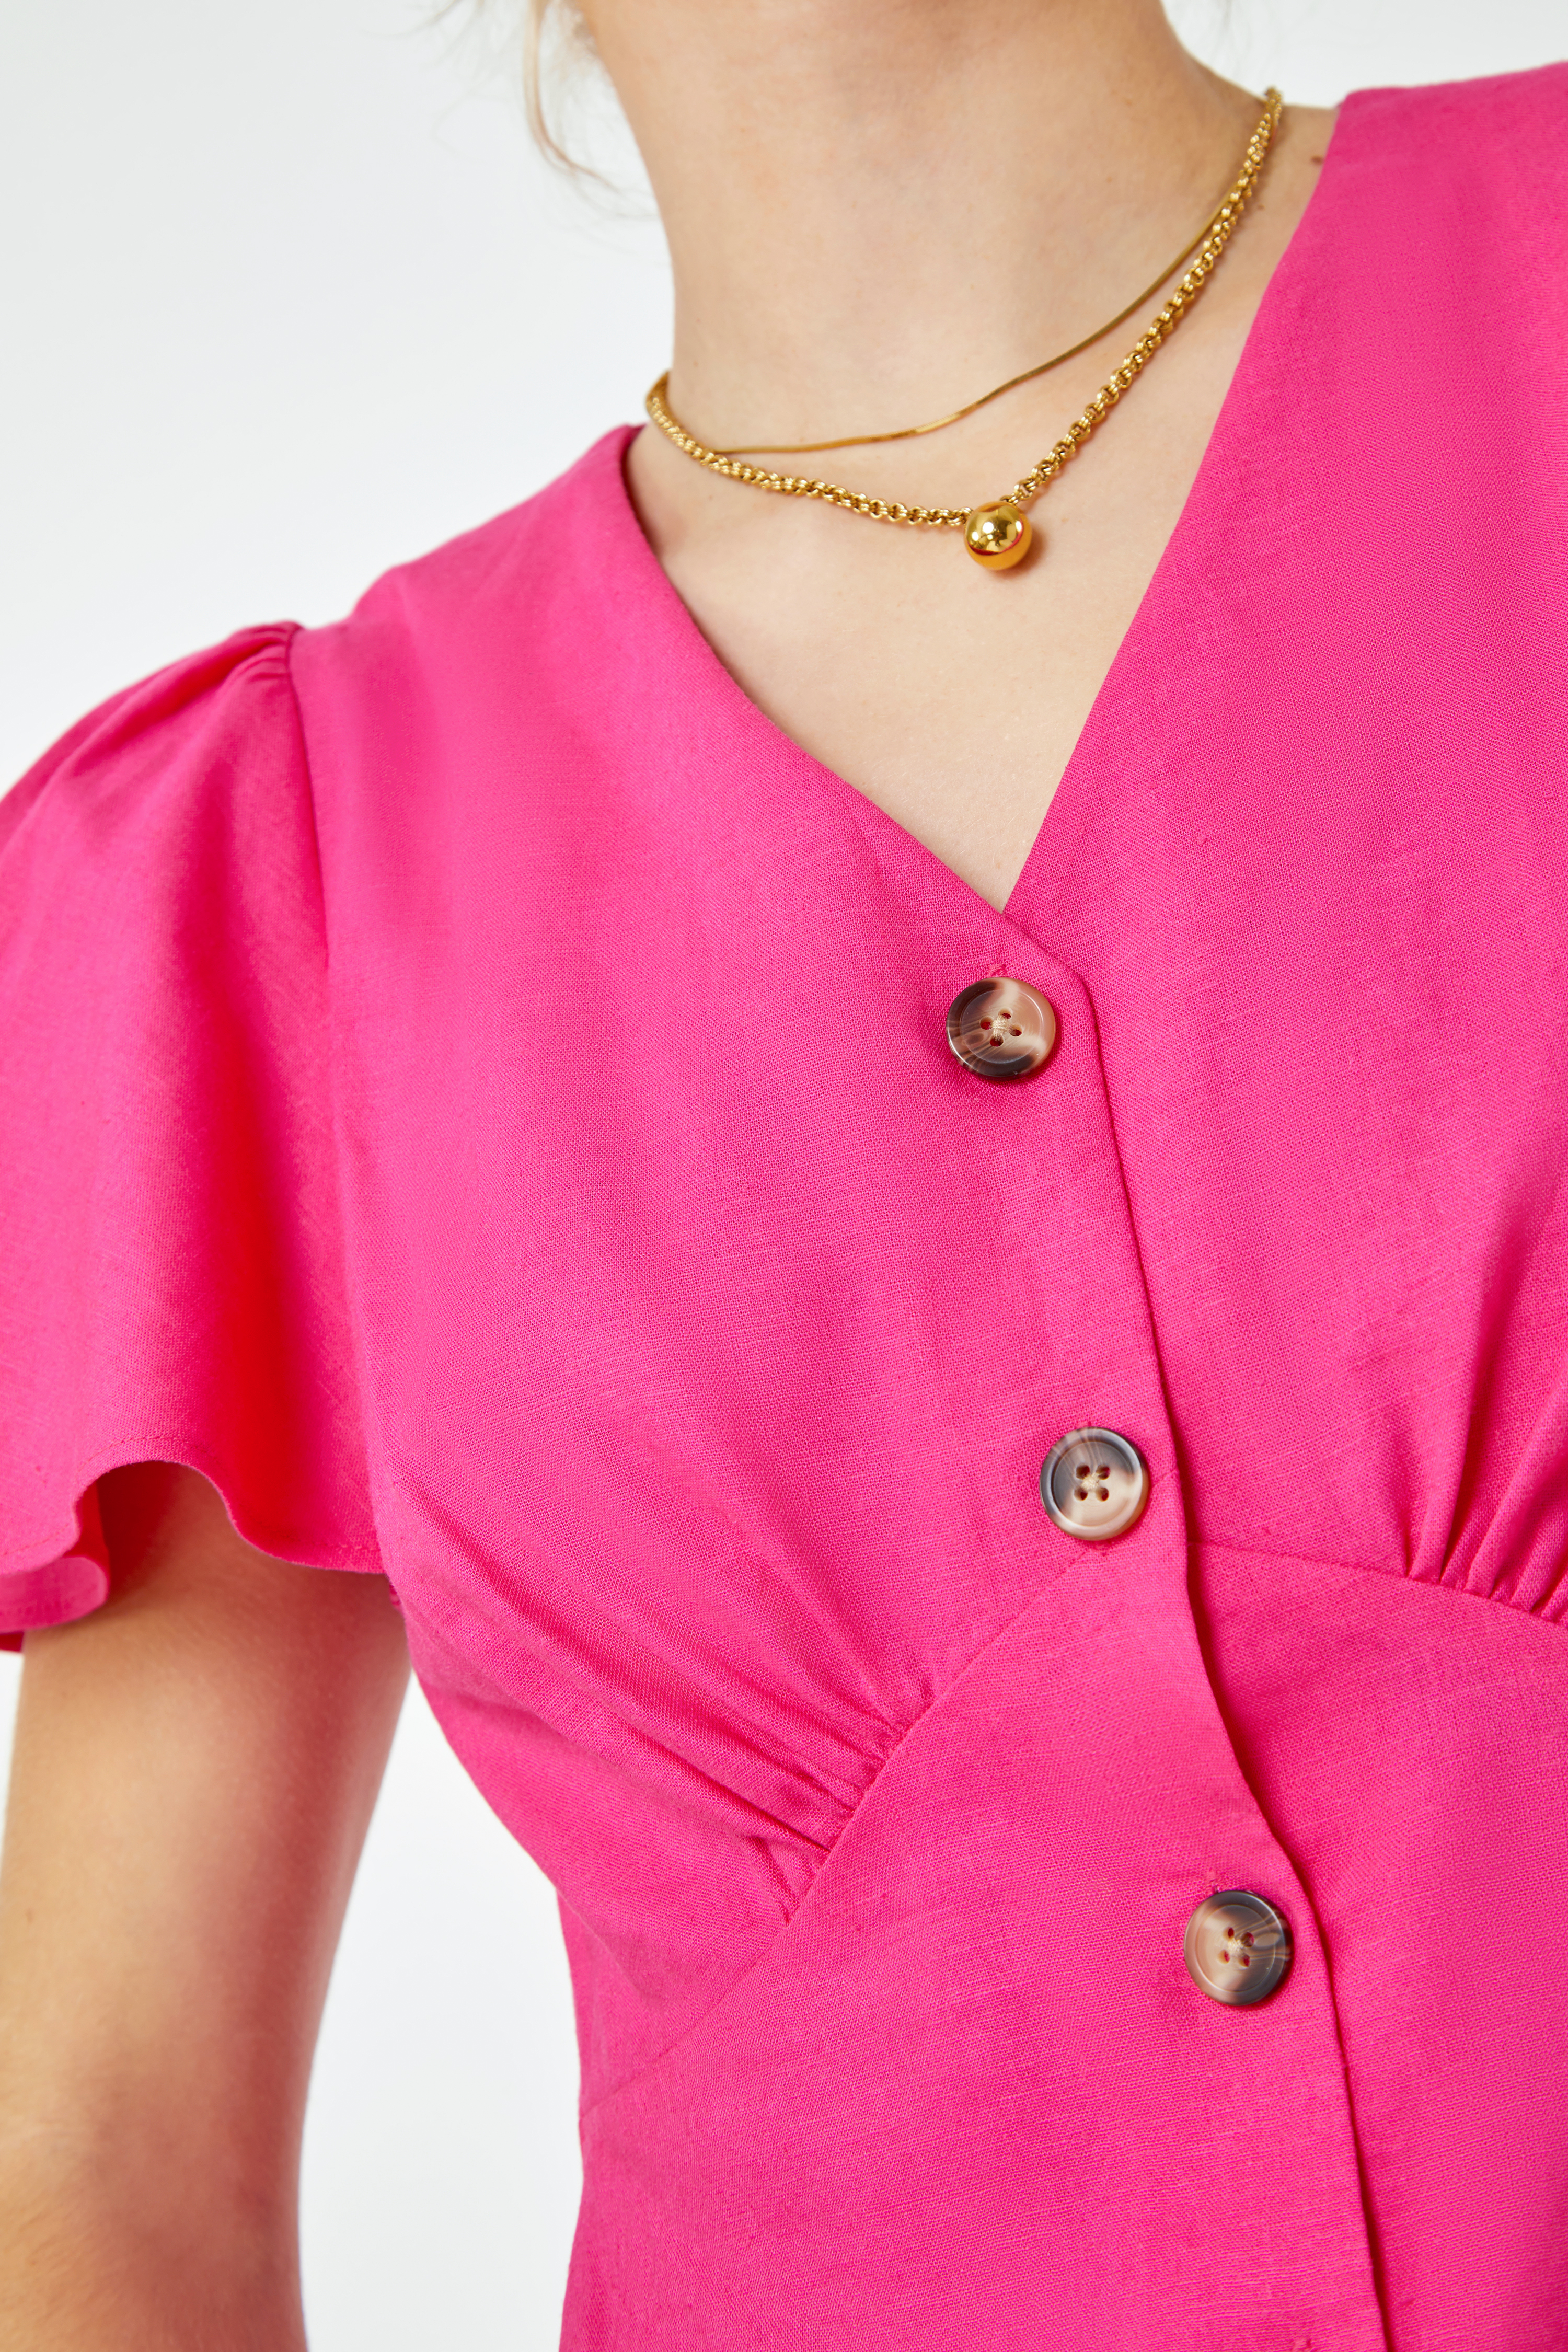 PINK Linen Button Through Blouse, Image 5 of 5